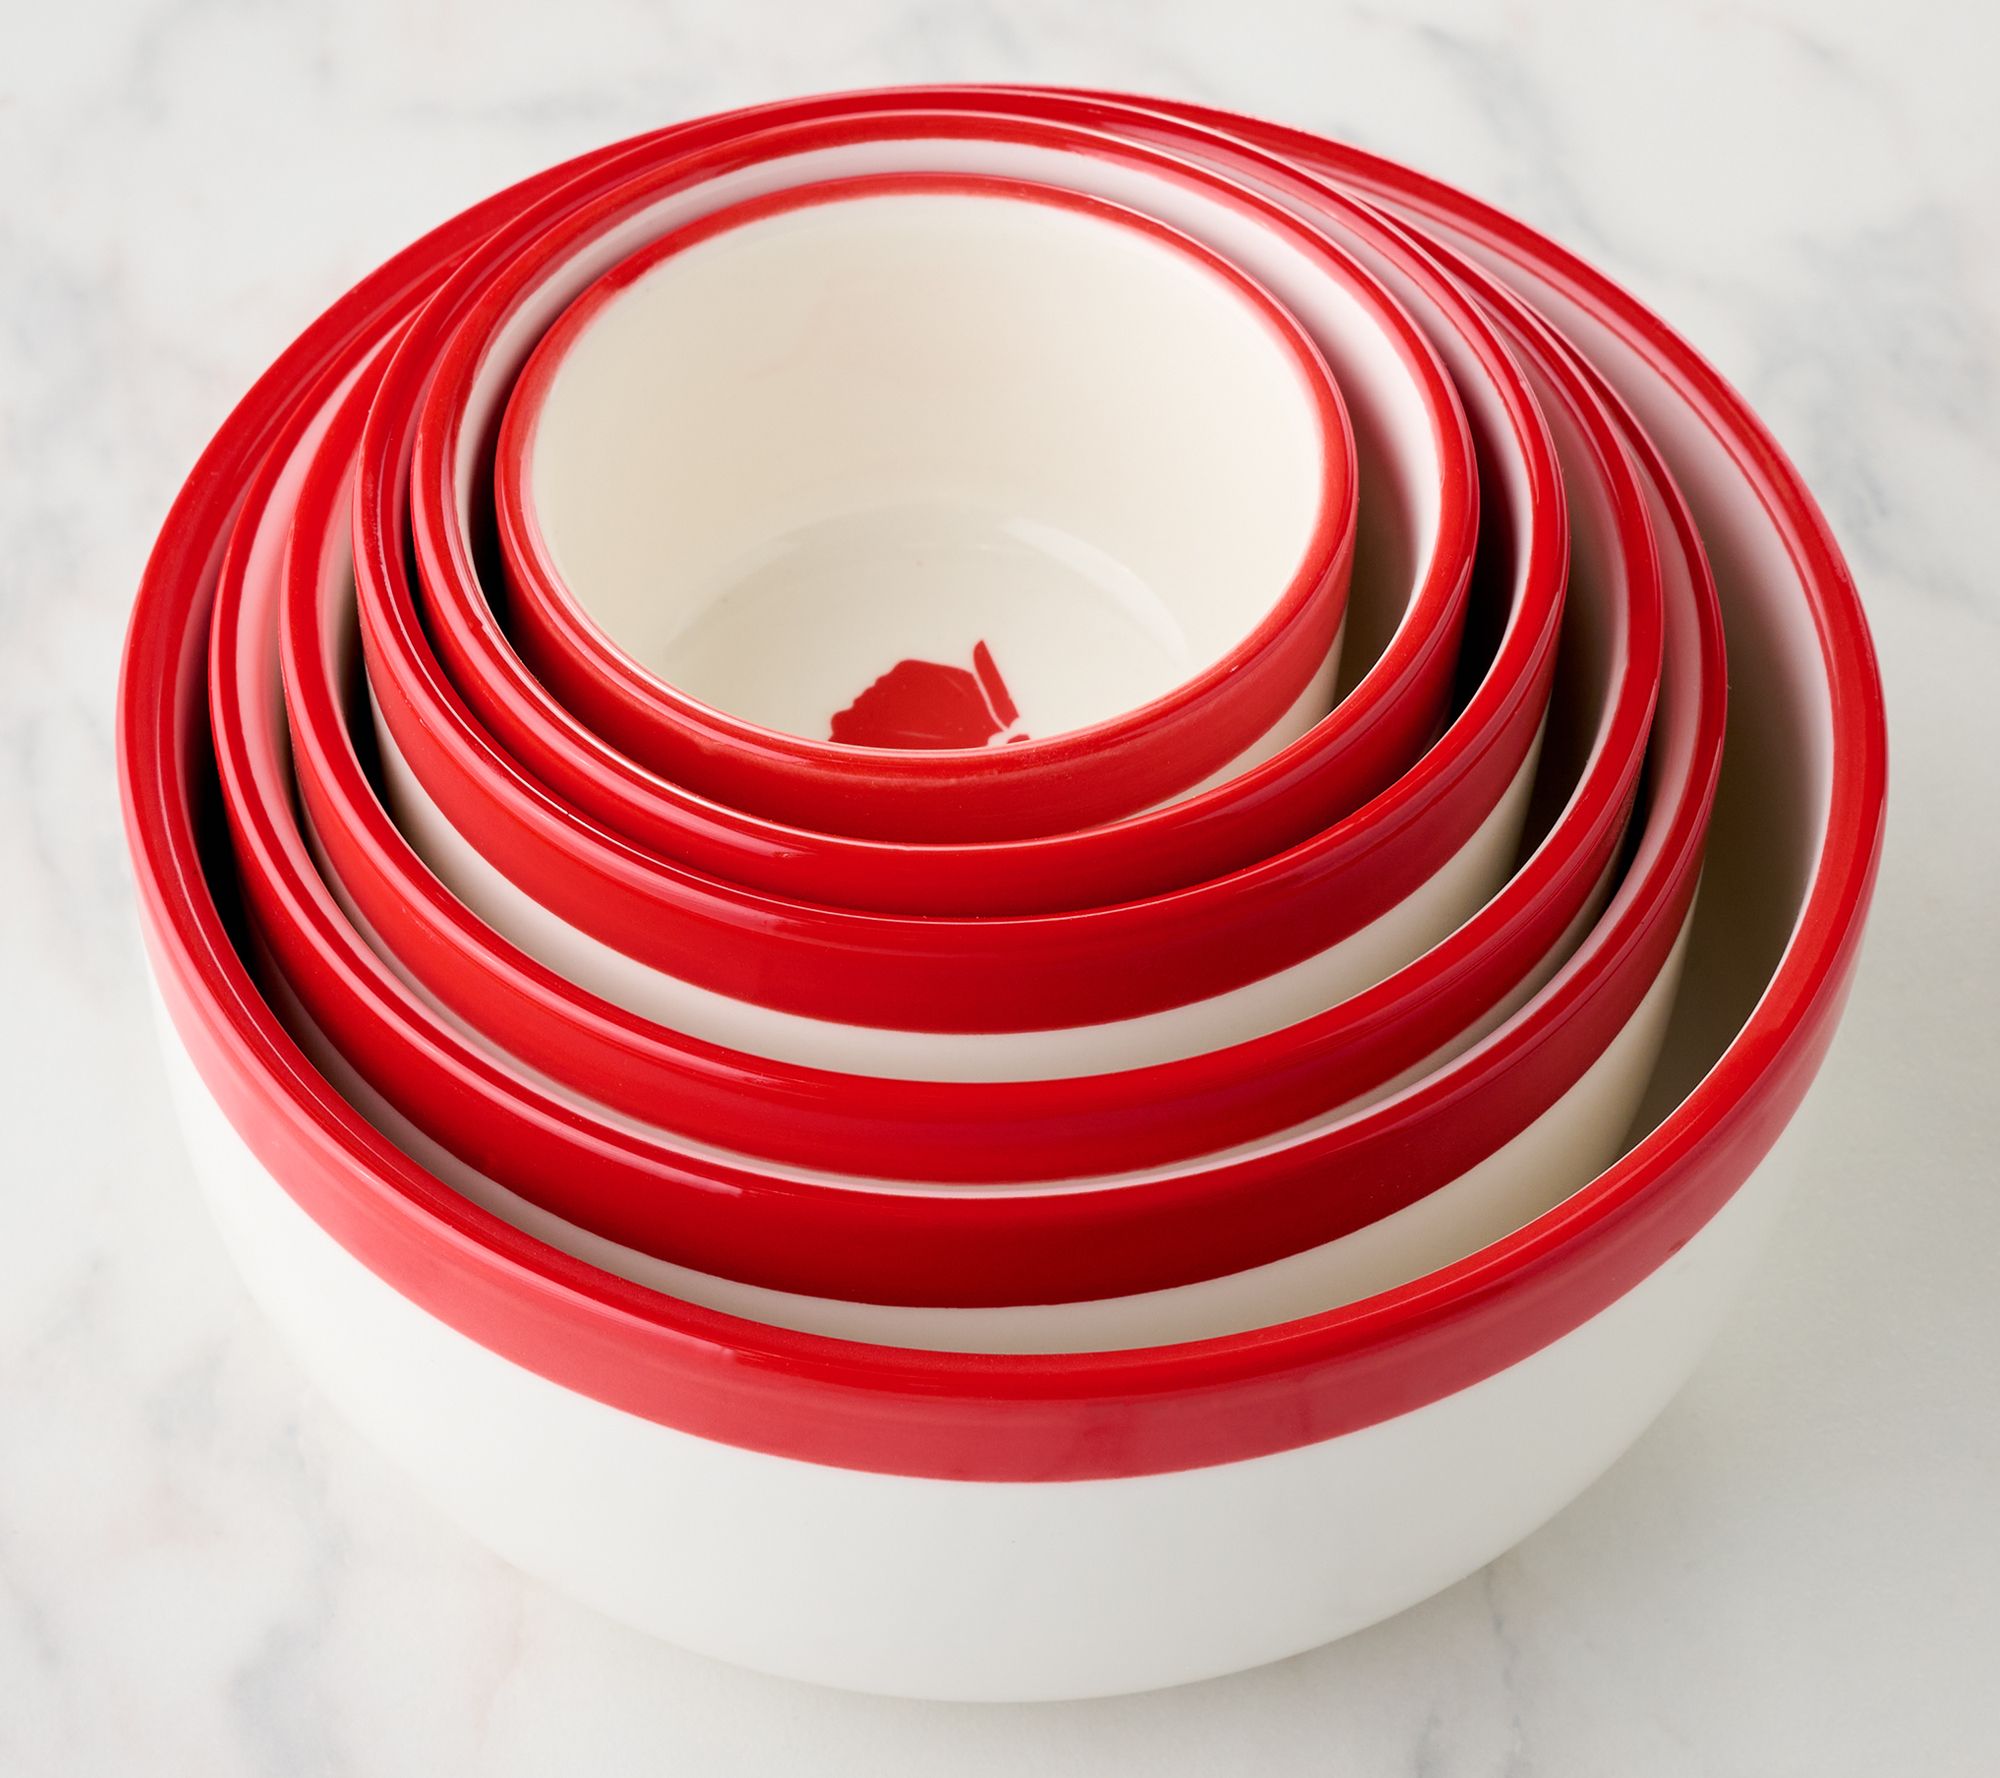 TUPPERWARE SALAD TIME SET, RED AND WHITE, NEW